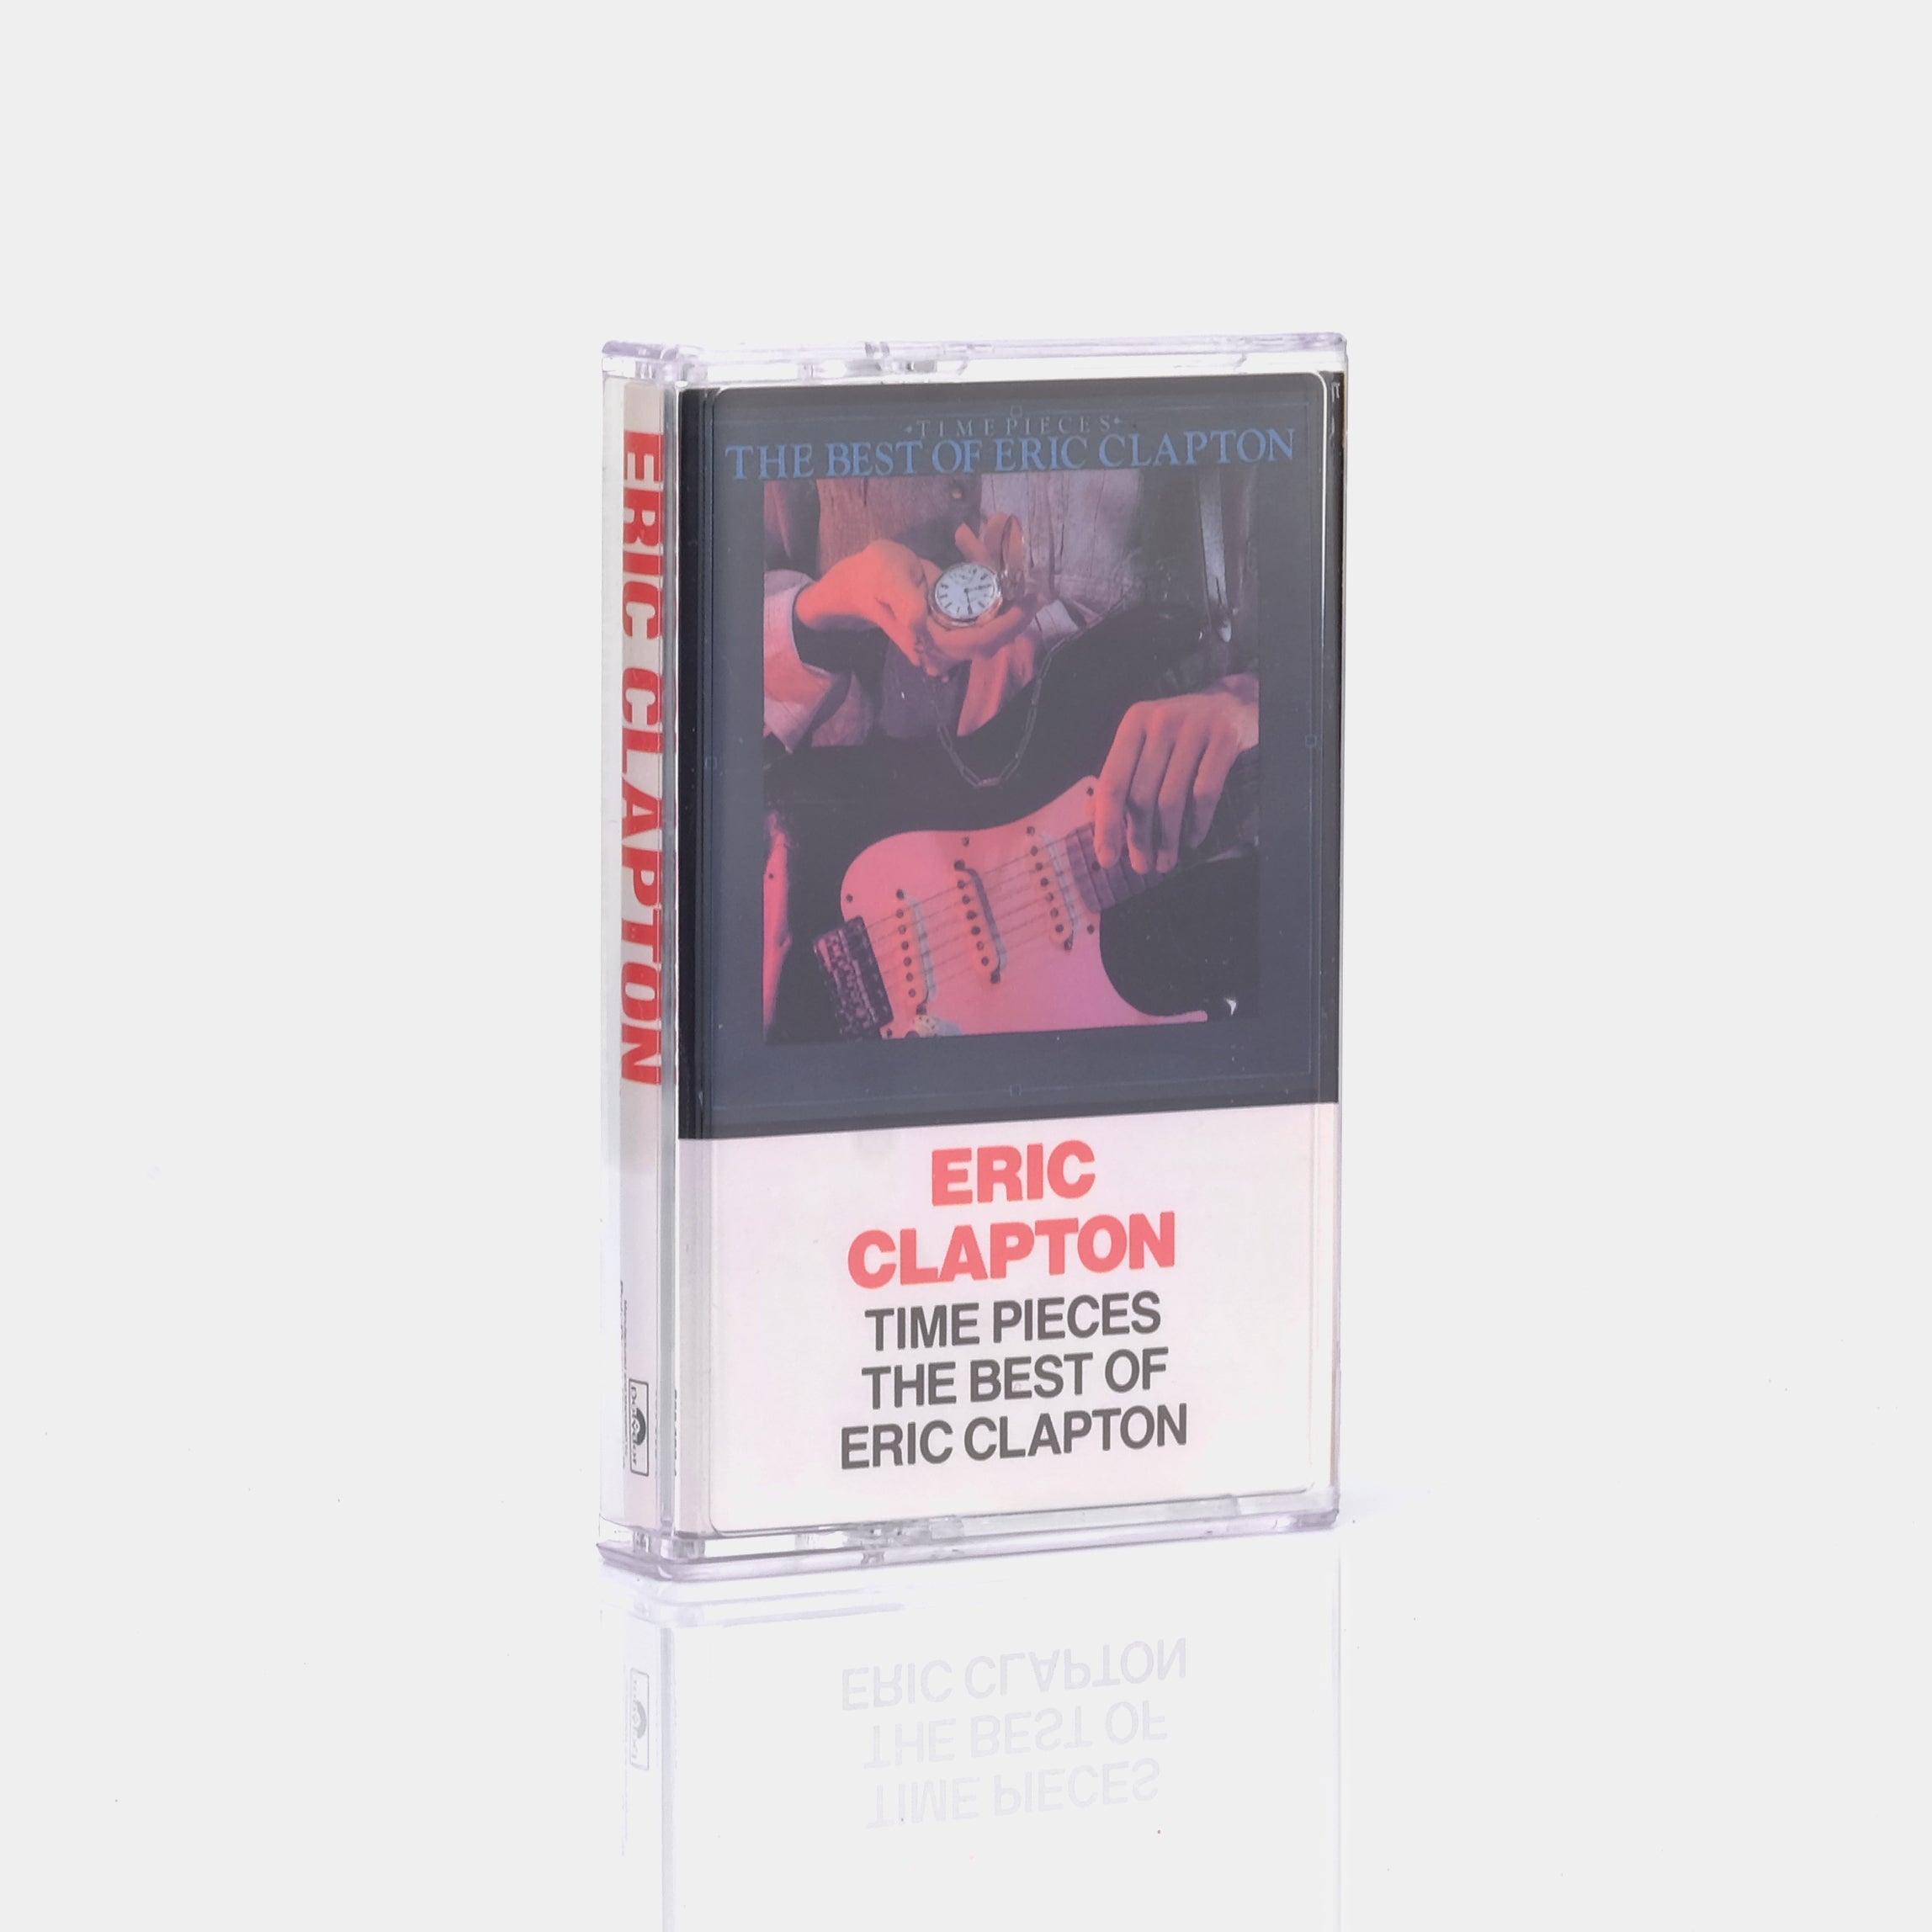 Eric Clapton - Time Pieces (The Best of Eric Clapton) Cassette Tape